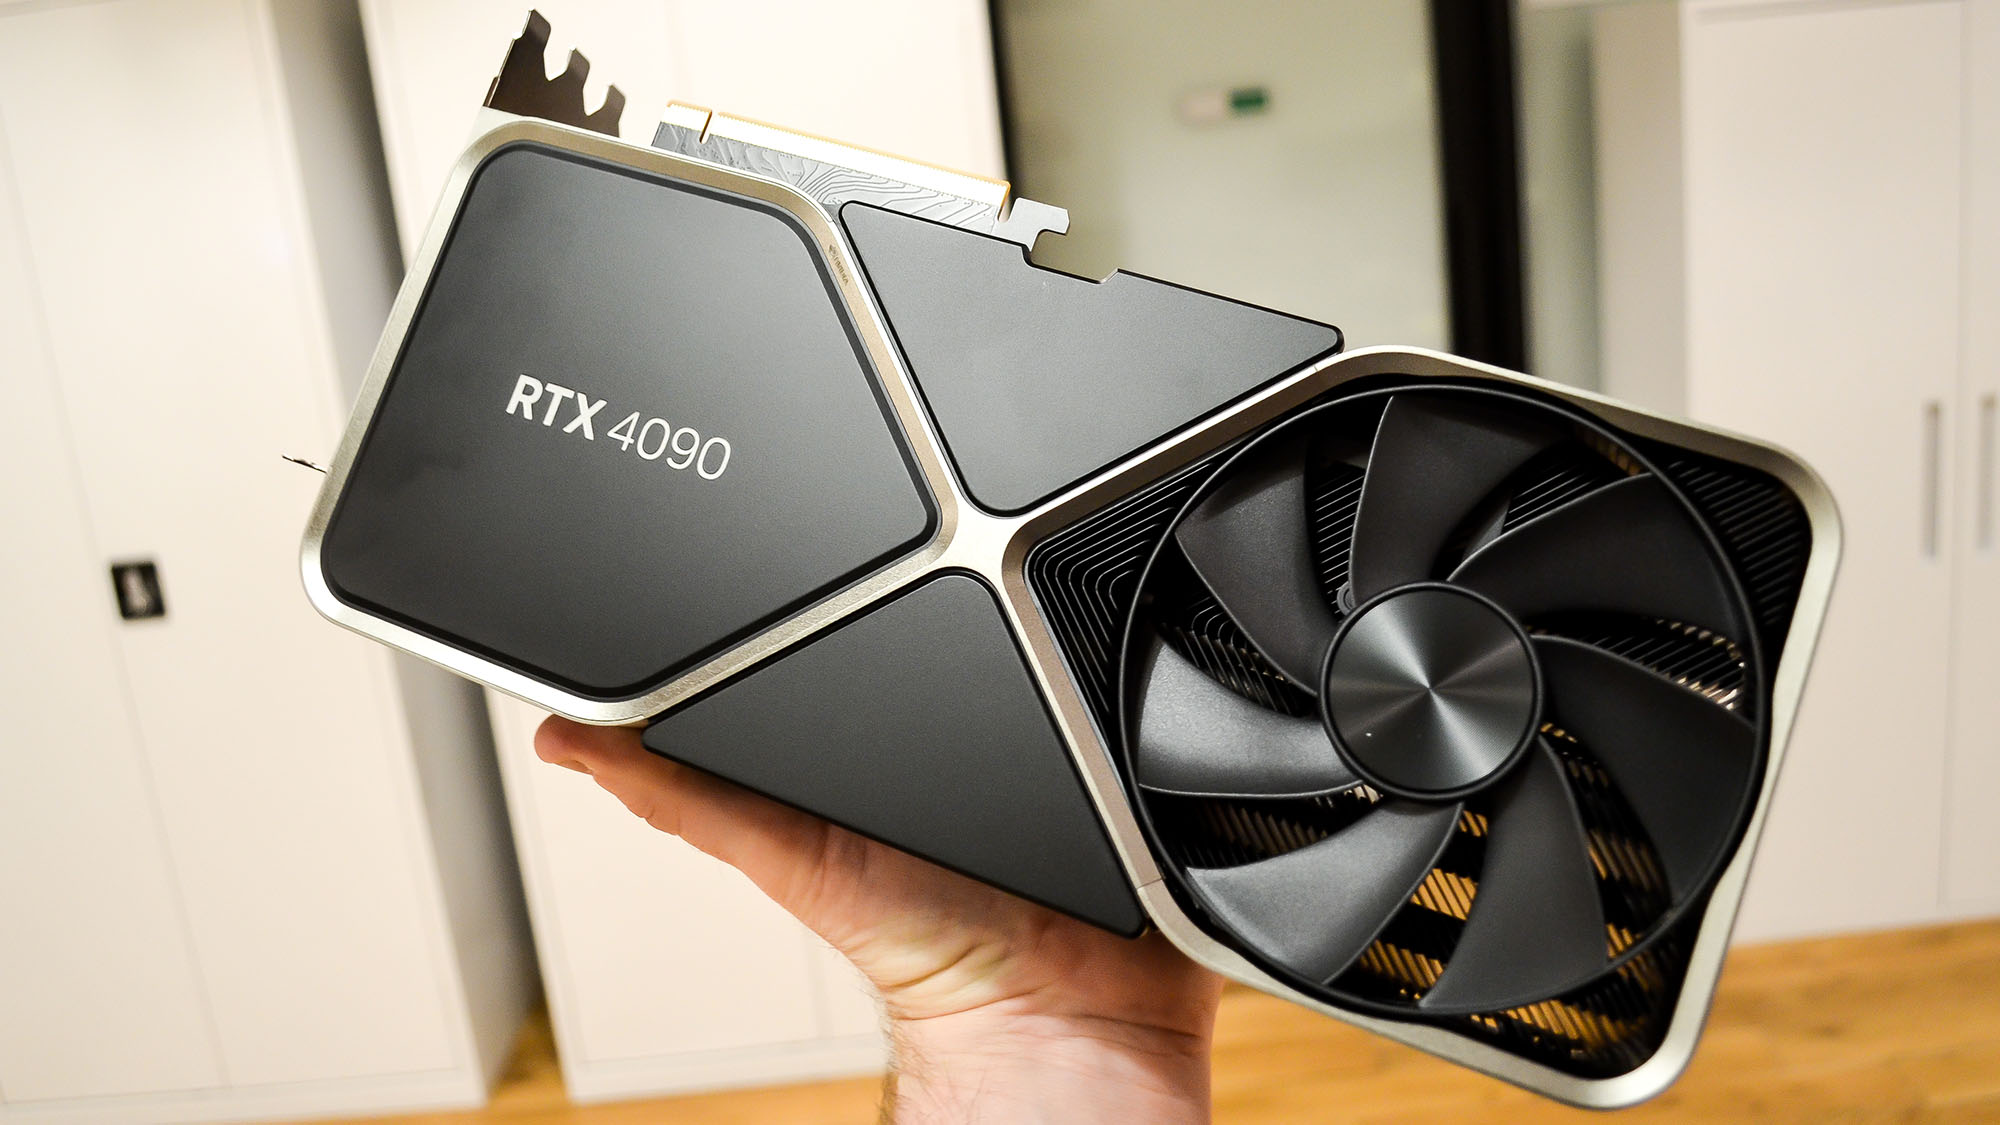 best graphics card Nvidia RTX 4090 being held by someone